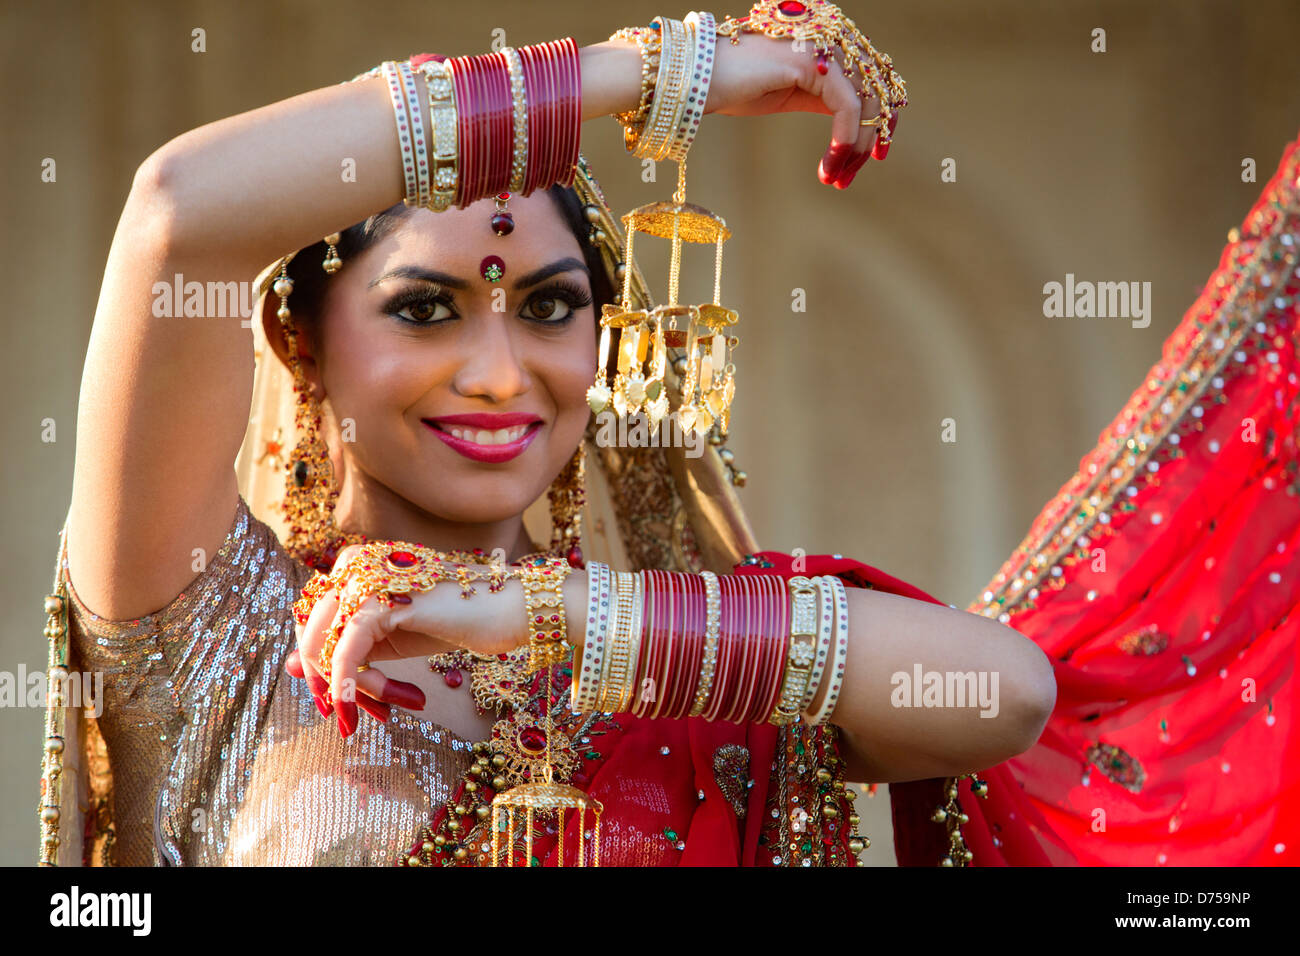 Beautiful Indian bride in traditional wedding dress and posing Stock Photo   Alamy